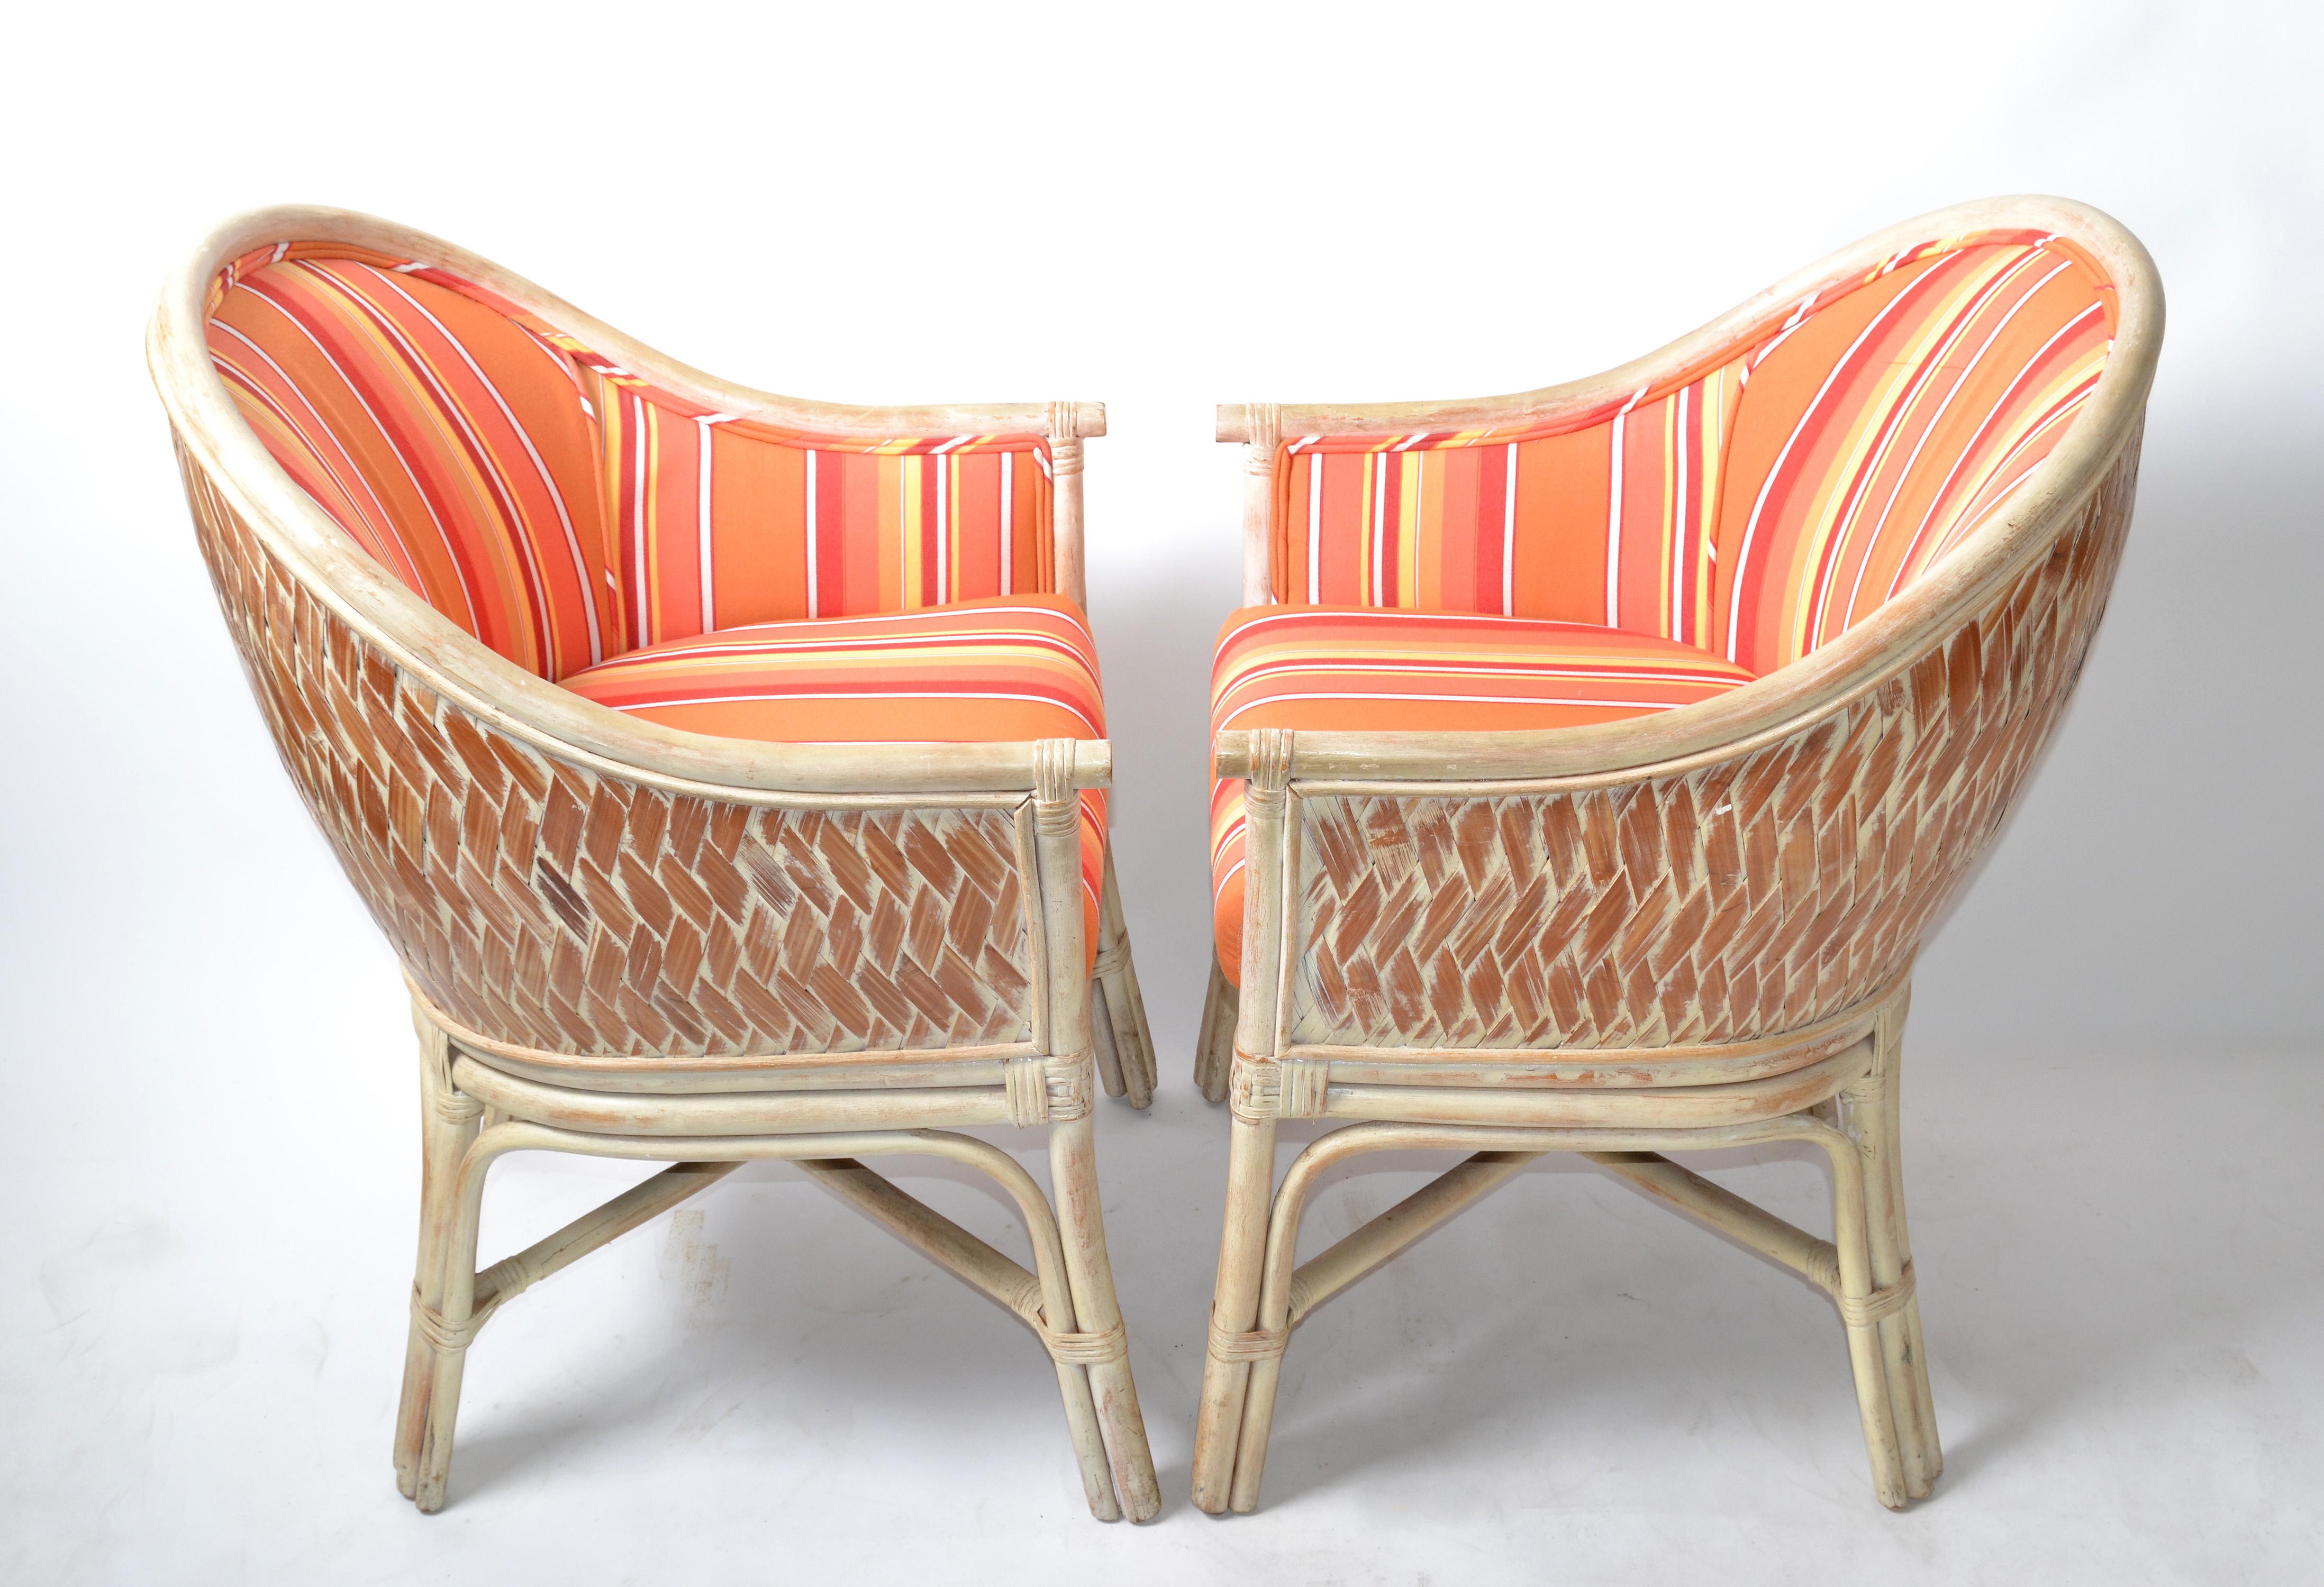 Pair of Bohemian style white washed bamboo and handwoven cane armchairs, with decorative X- base.
Vibrant orange striped cotton fabric Upholstery and each chair has a comfortable seat cushions.
Measures: Arm height 24.5 inches.